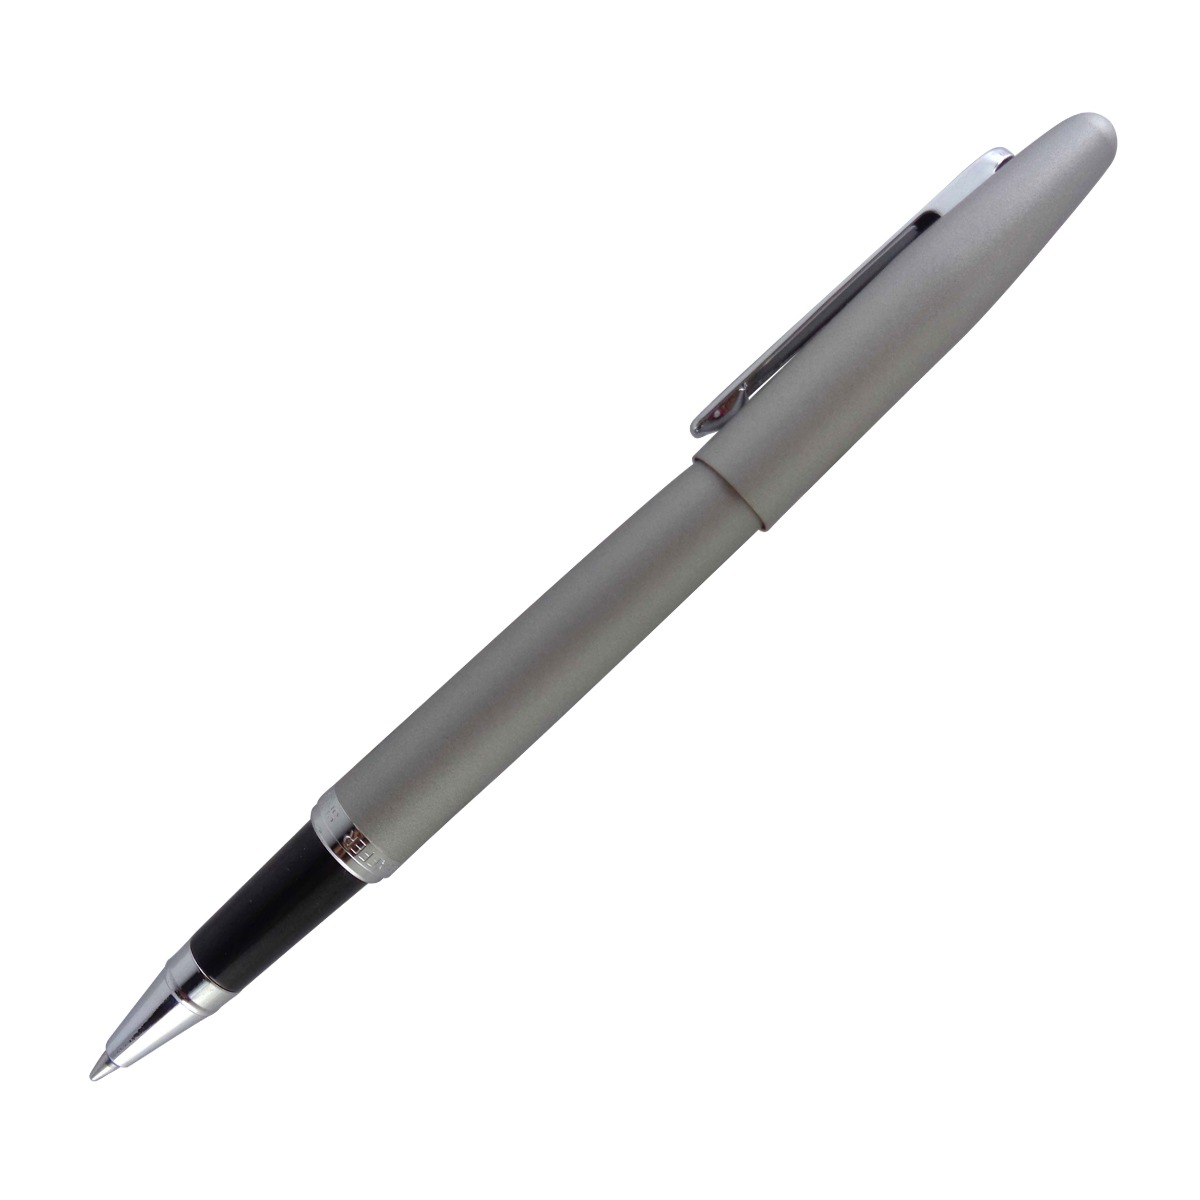 Sheaffer A 9400 RB Model: 15192 Silver color body with silver clip  medium tip cap type rollerball